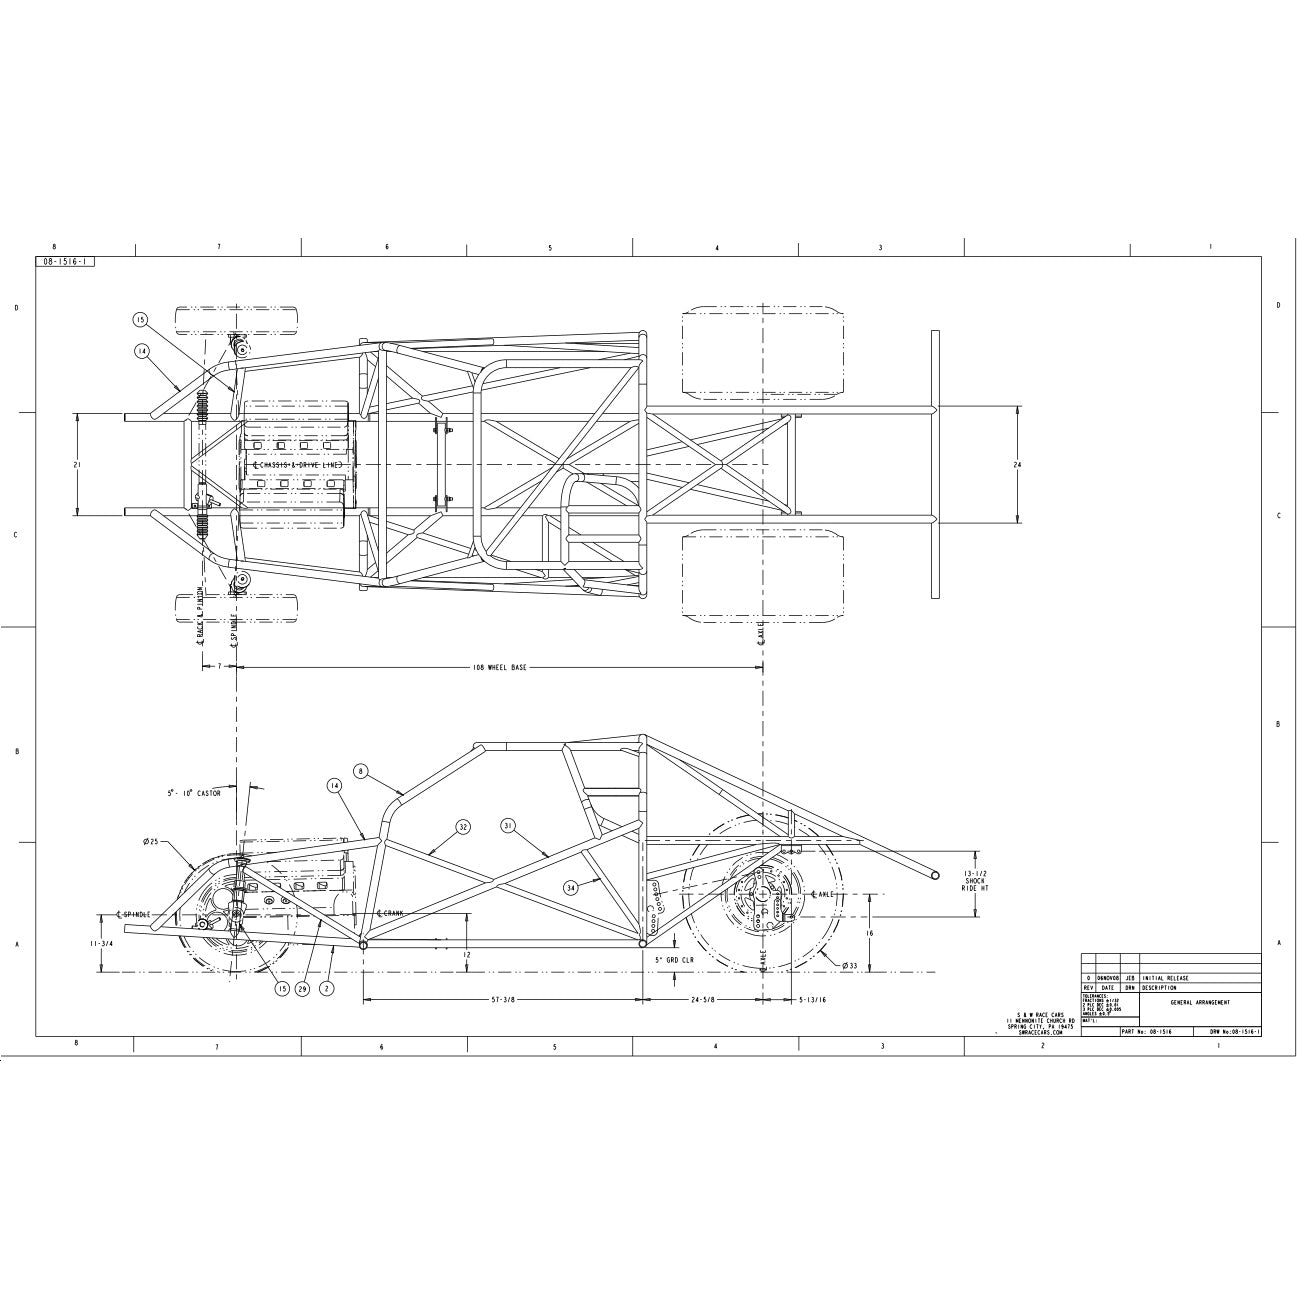 1982 - 2002 Chevrolet S-10 Extended Cab Tube Chassis Blueprint